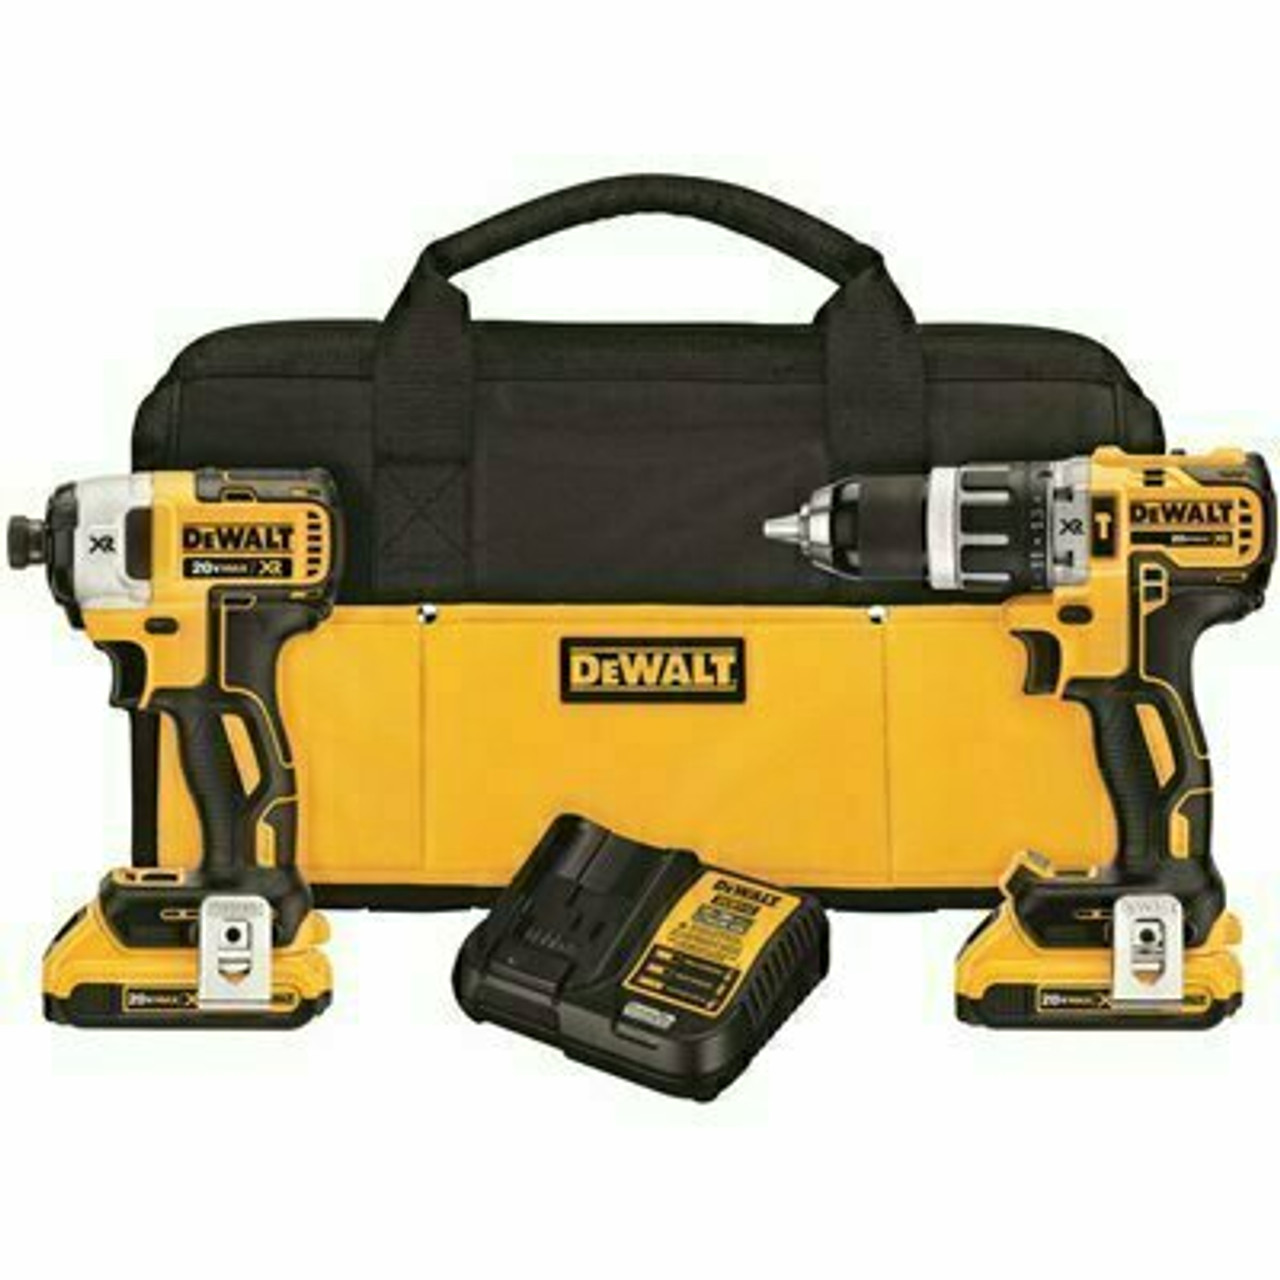 Dewalt 20-Volt Max Xr Cordless Brushless Hammer Drill/Impact Combo Kit (2-Tool) With (2) 20-Volt 2.0Ah Batteries And Charger